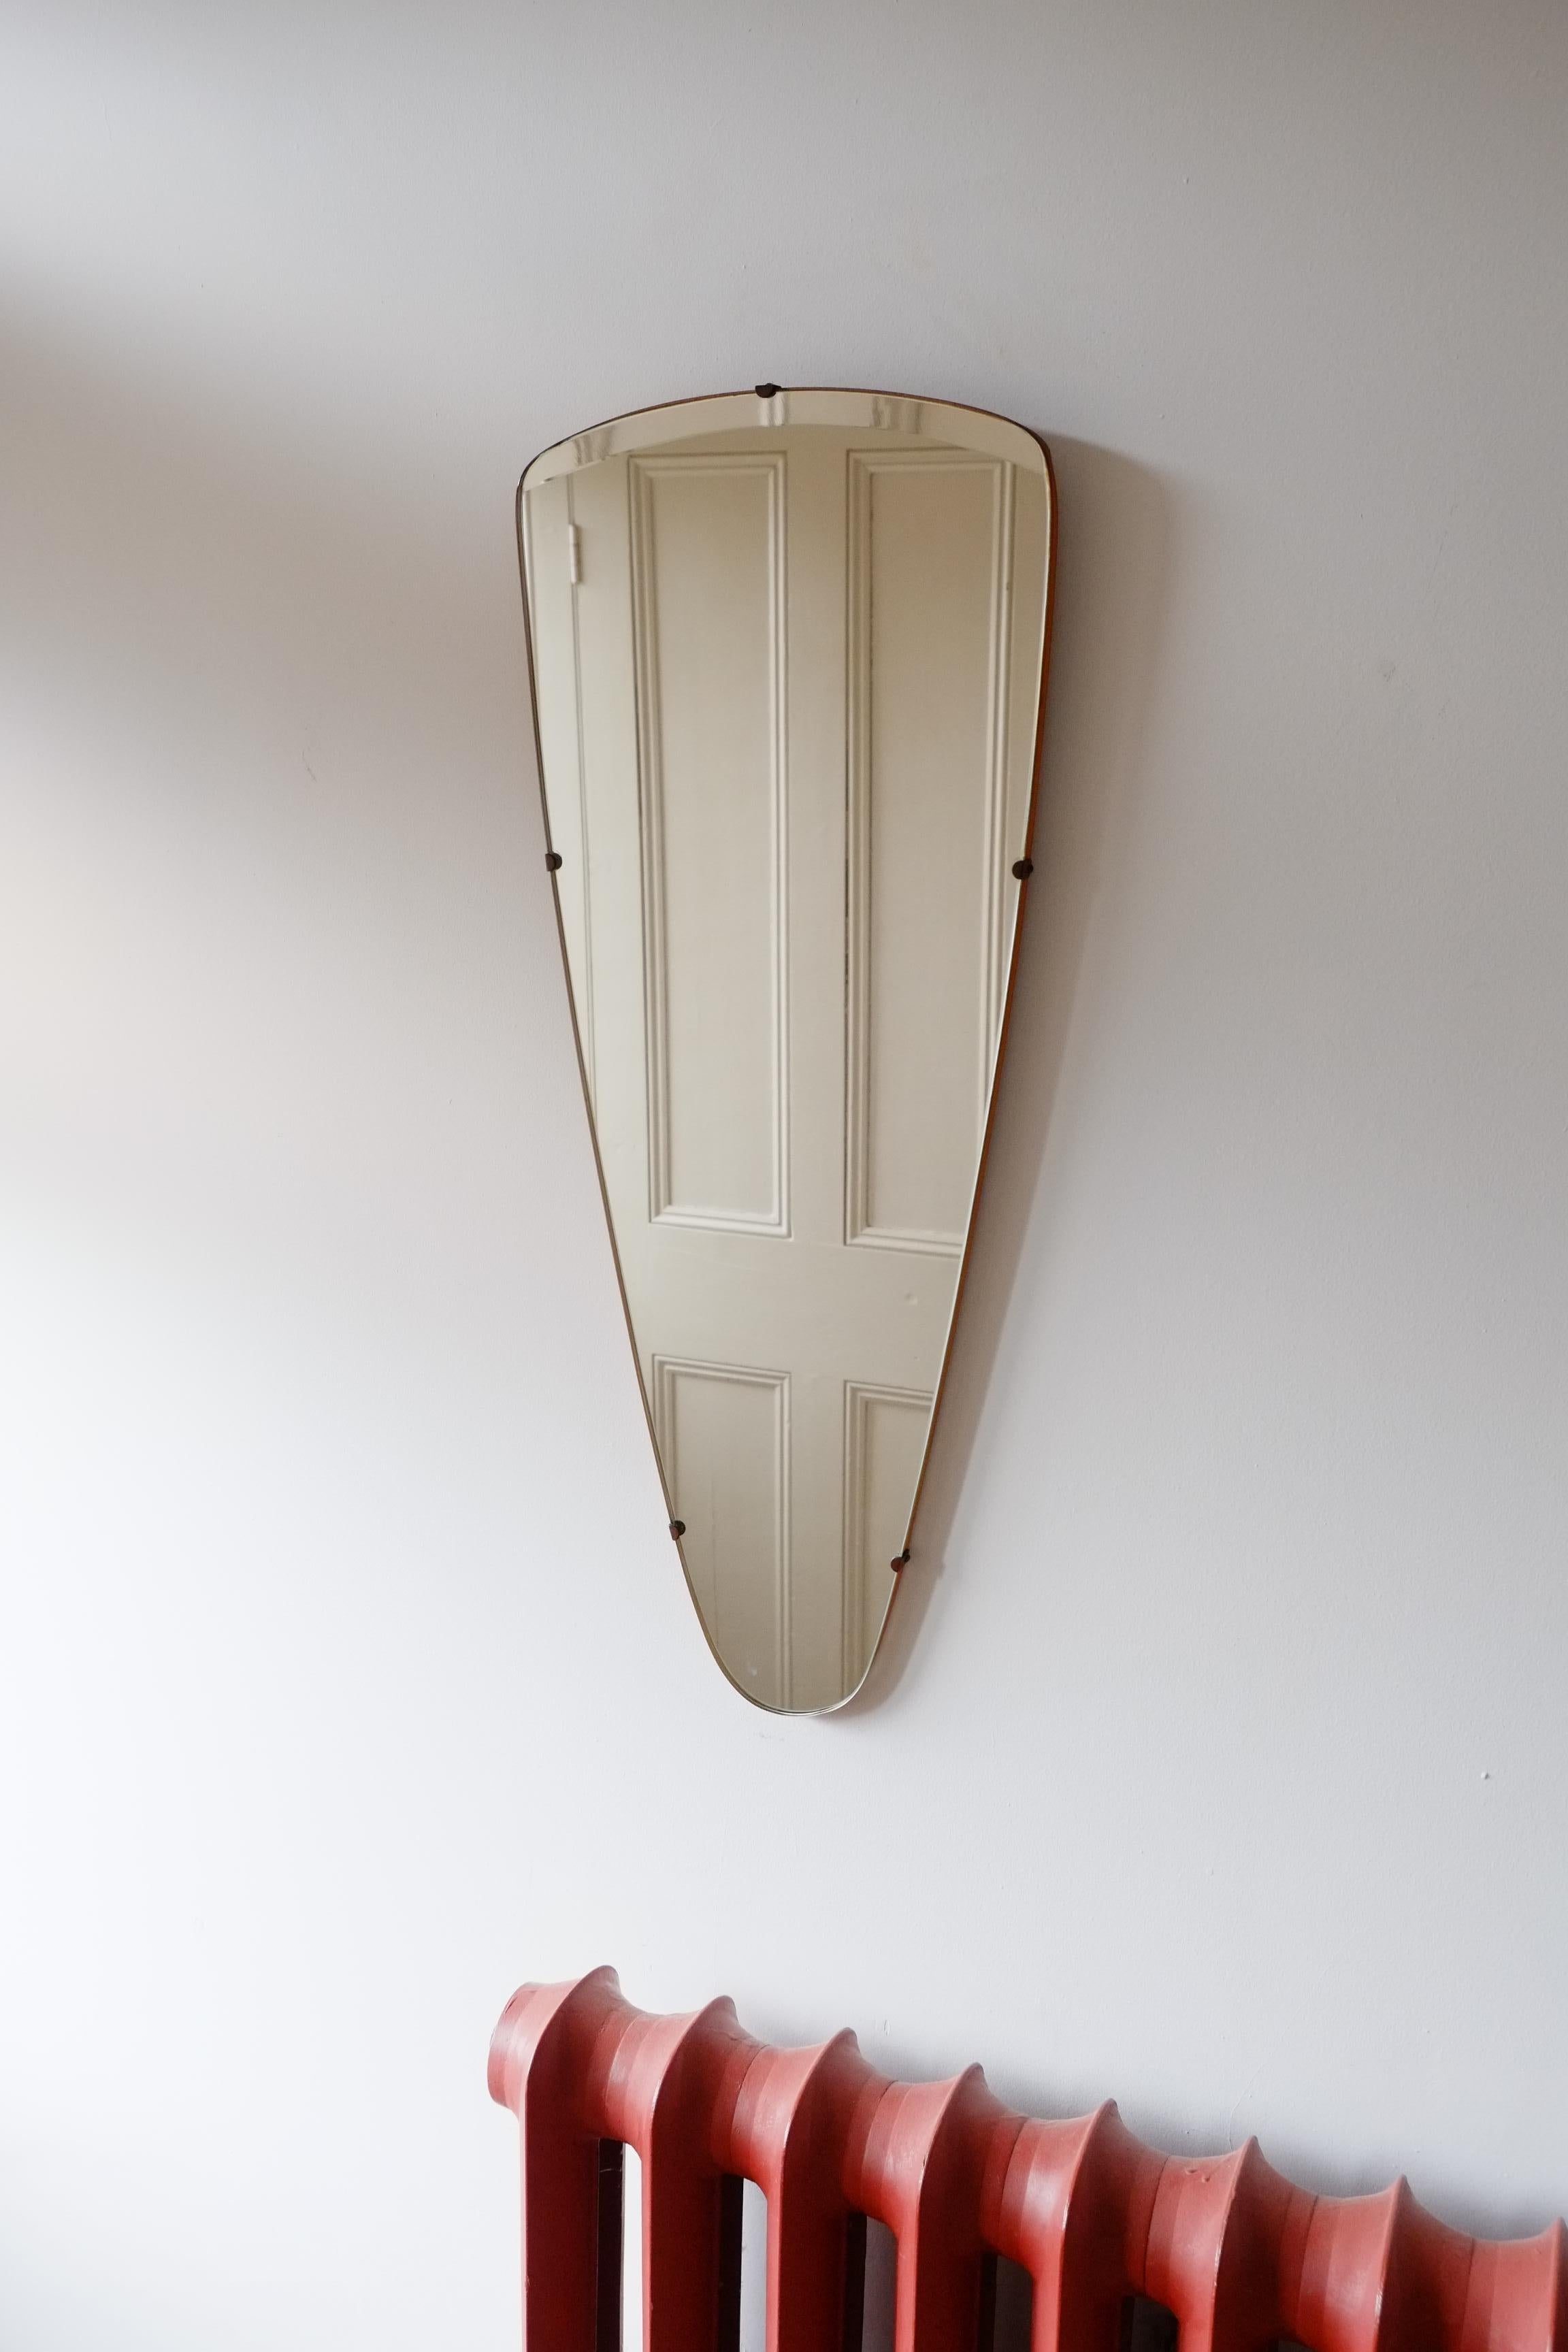 A rare midcentury triangular mirror. The mirror has a gorgeous minimal style, with a frameless glass, wooden back and metal clasps at the edges. I haven't seen this wedge shaped triangle shape often and this one is particularly nice as it has a